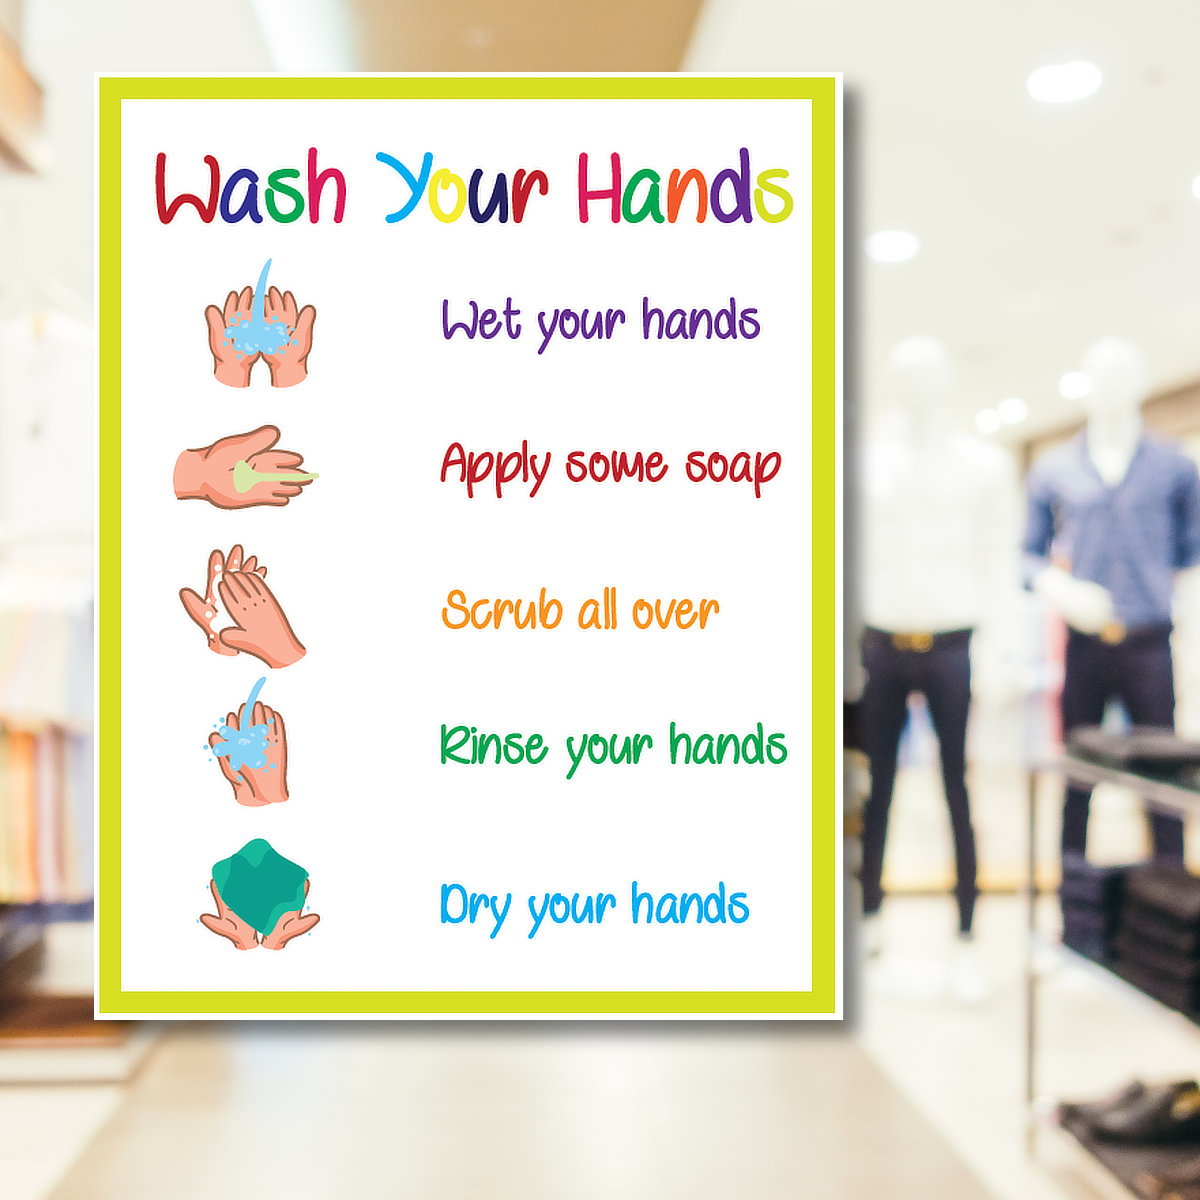 Hand Washing How To Poster